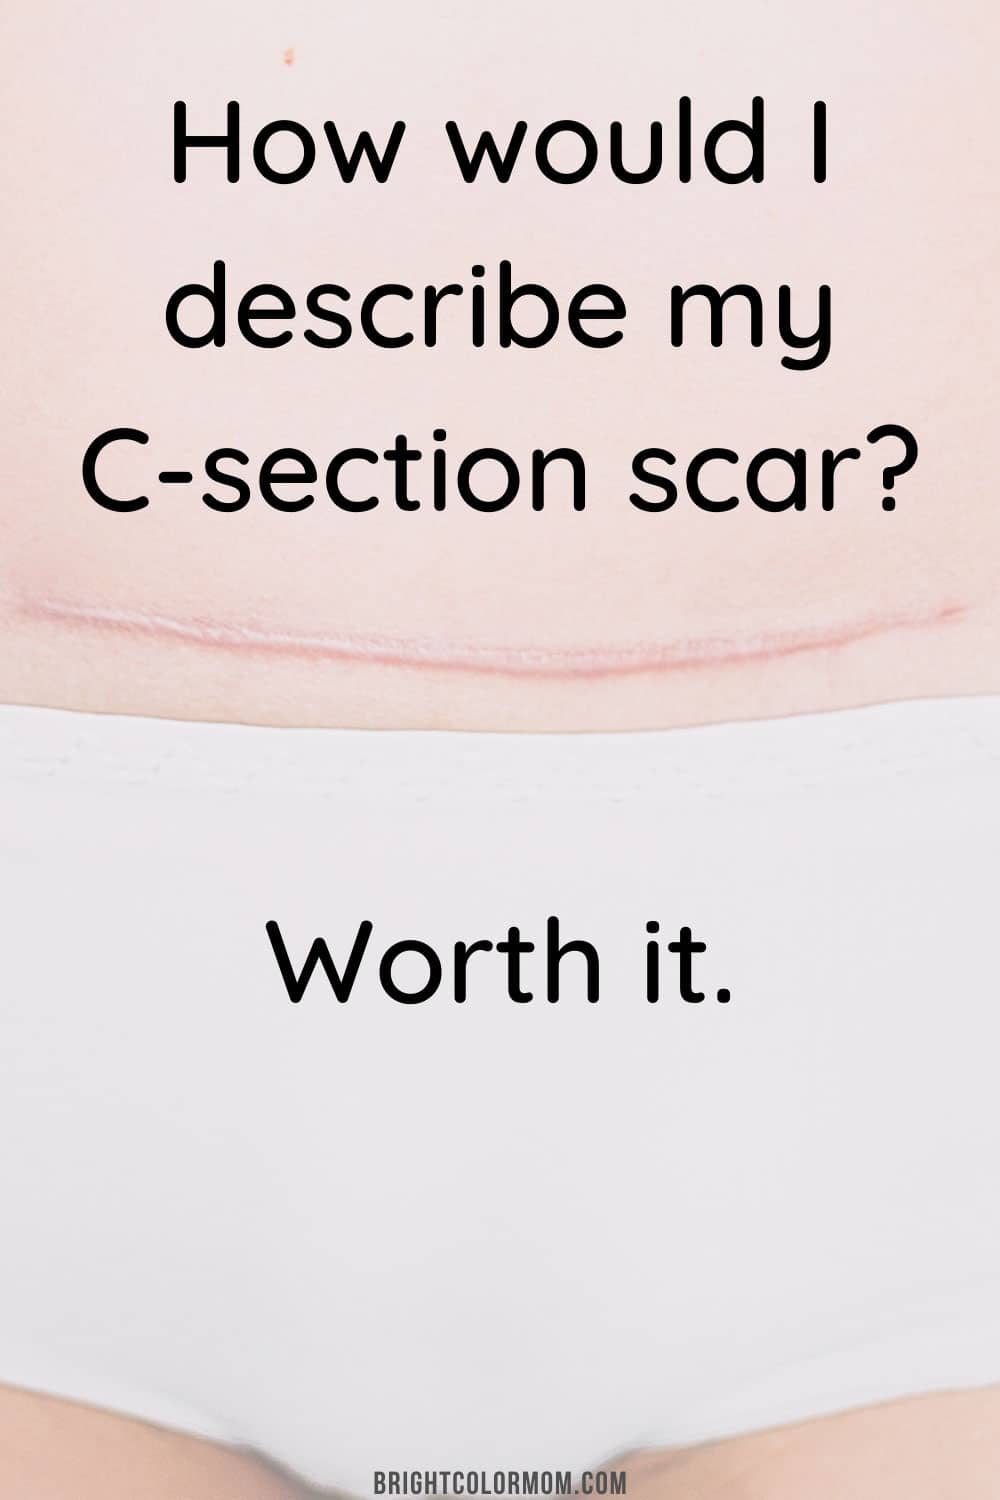 How would I describe my C-section scar? Worth it.